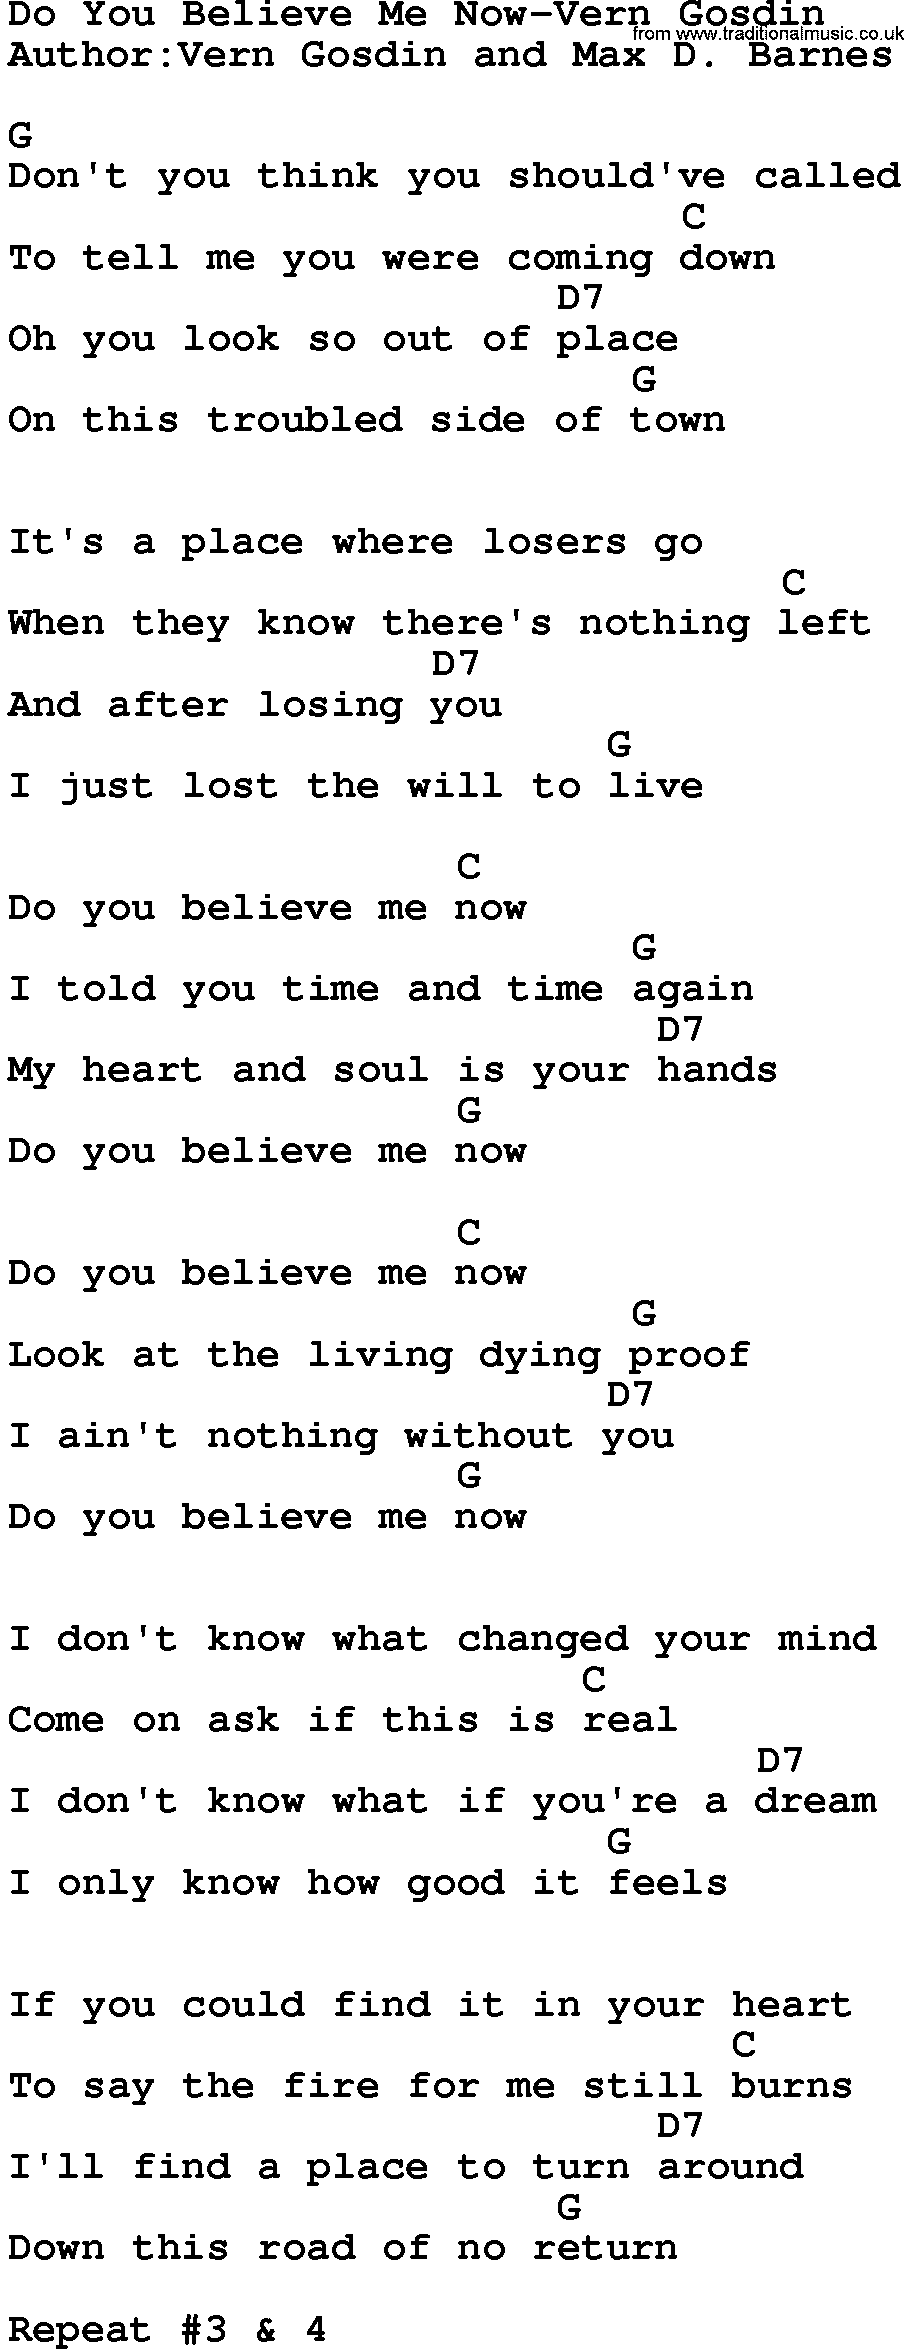 Country music song: Do You Believe Me Now-Vern Gosdin lyrics and chords